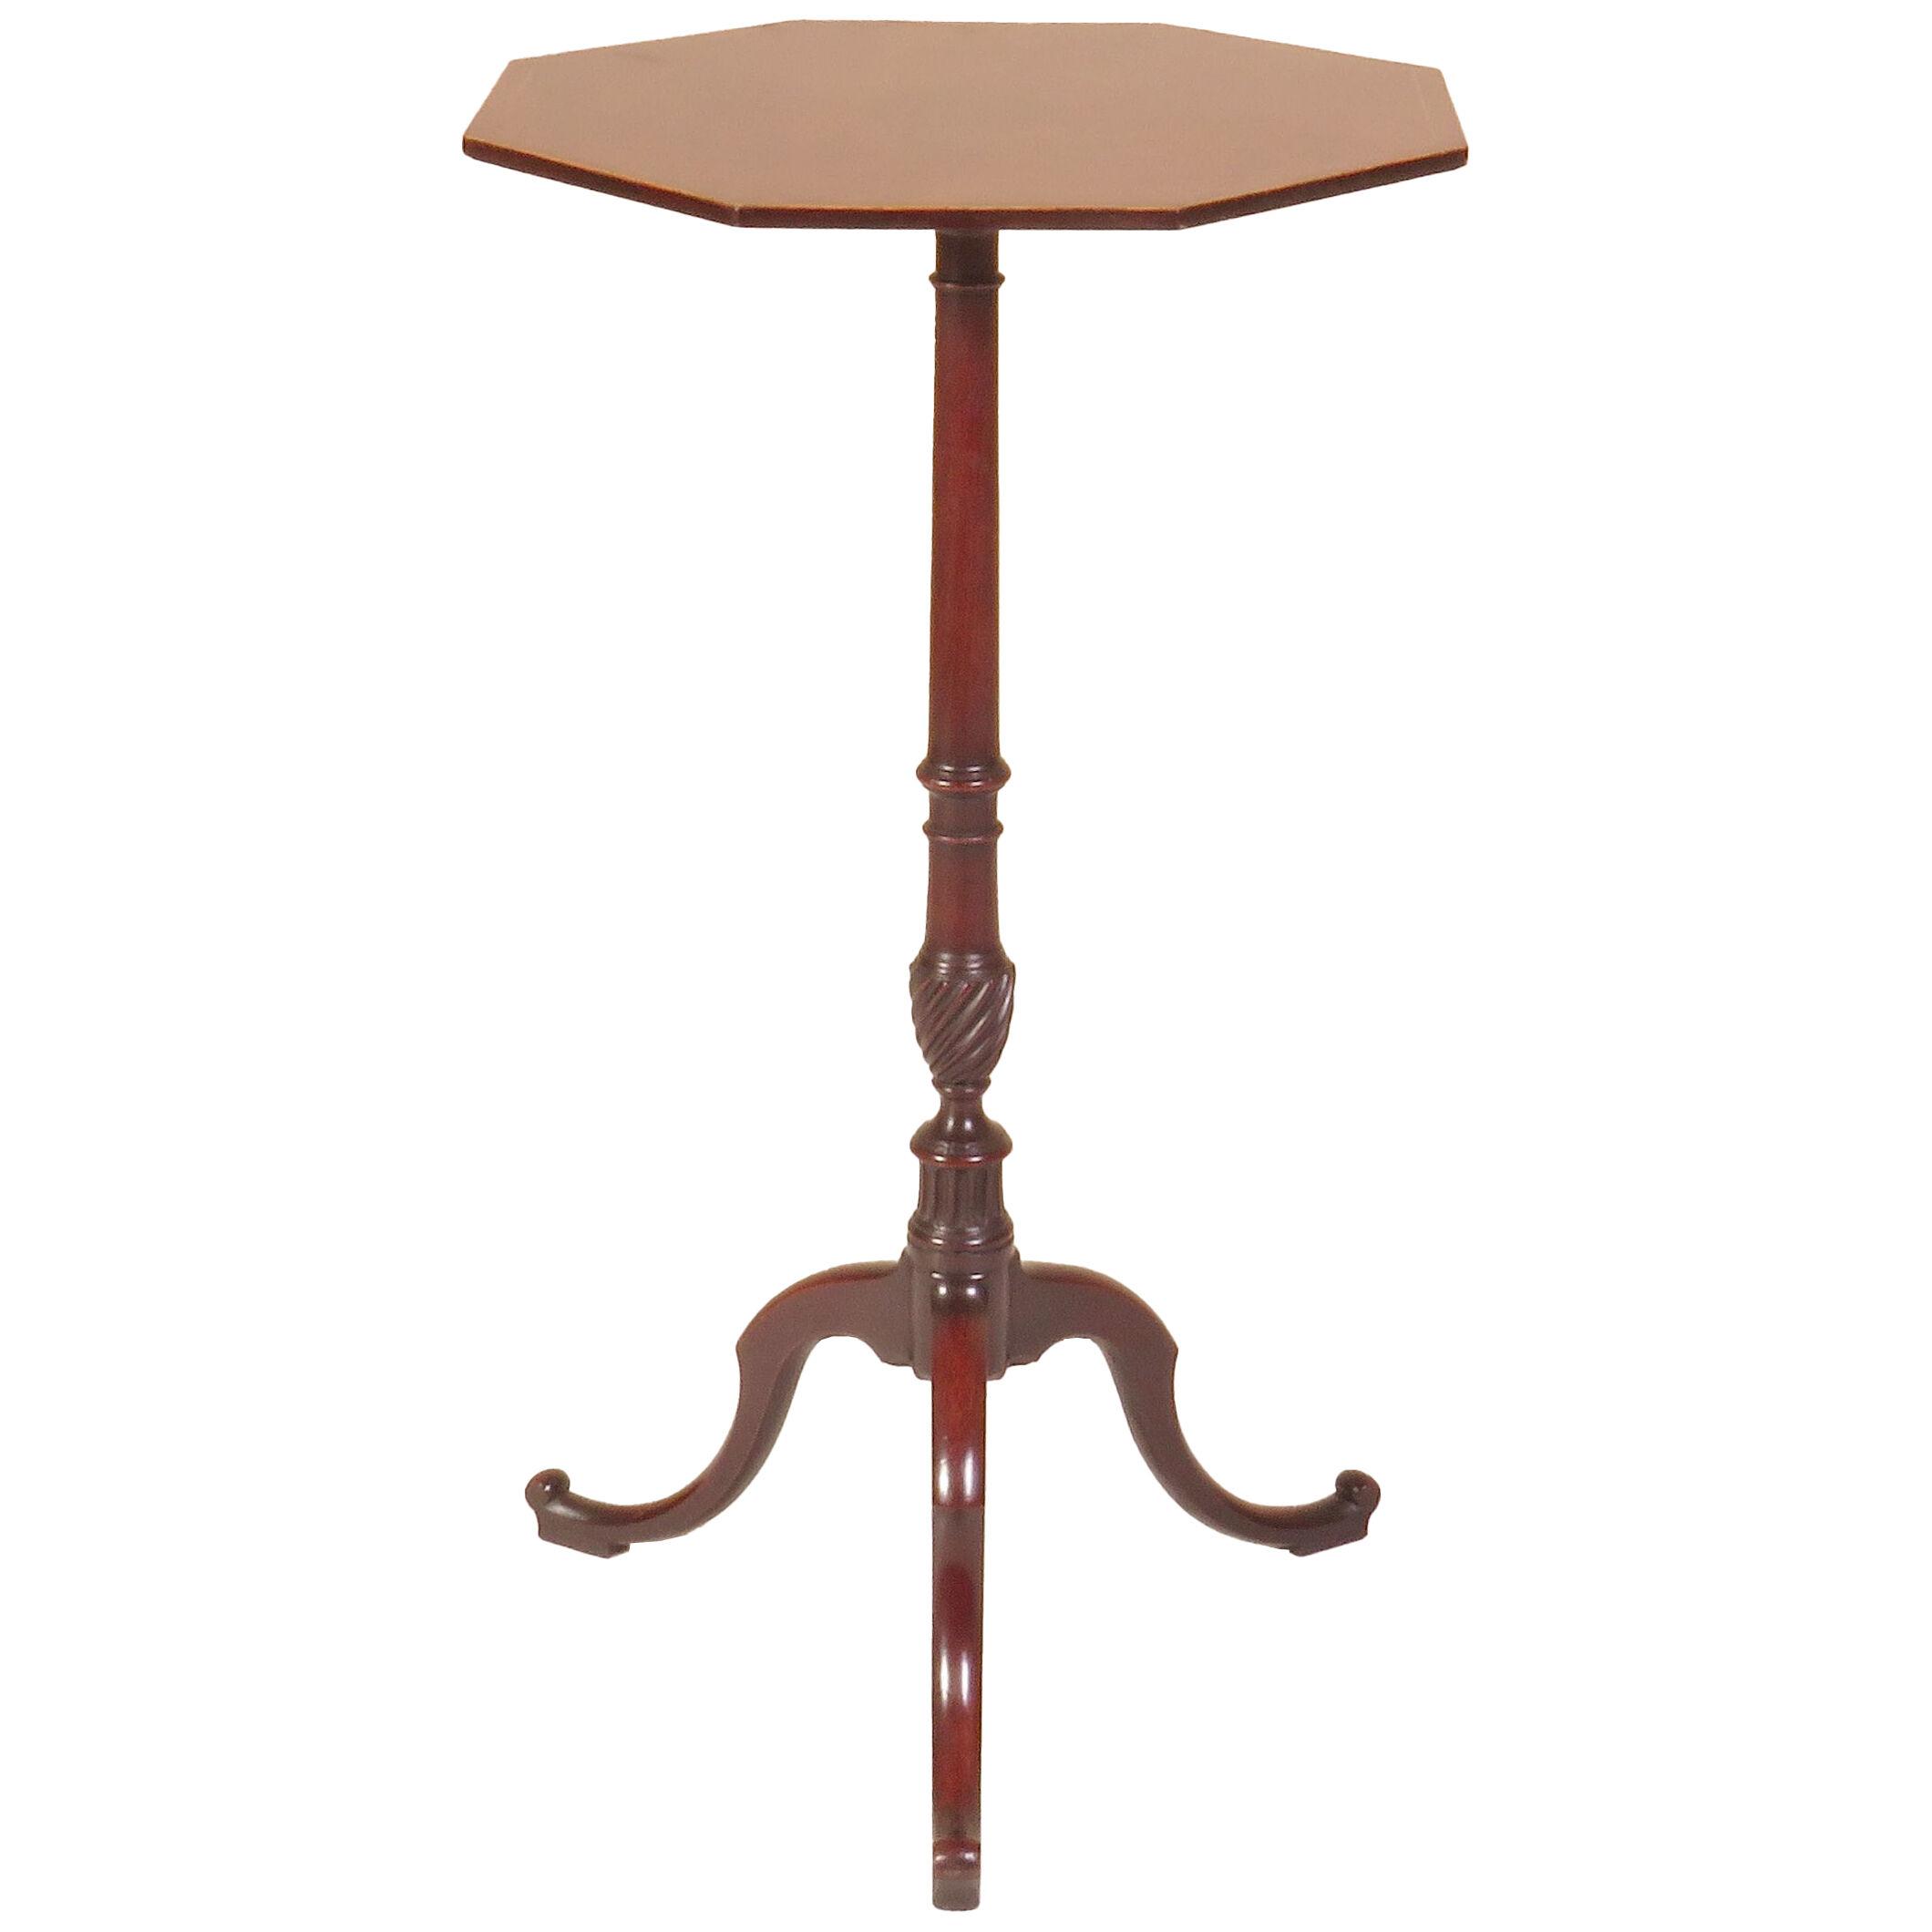 An 18th Century Chippendale Period Tripod Table